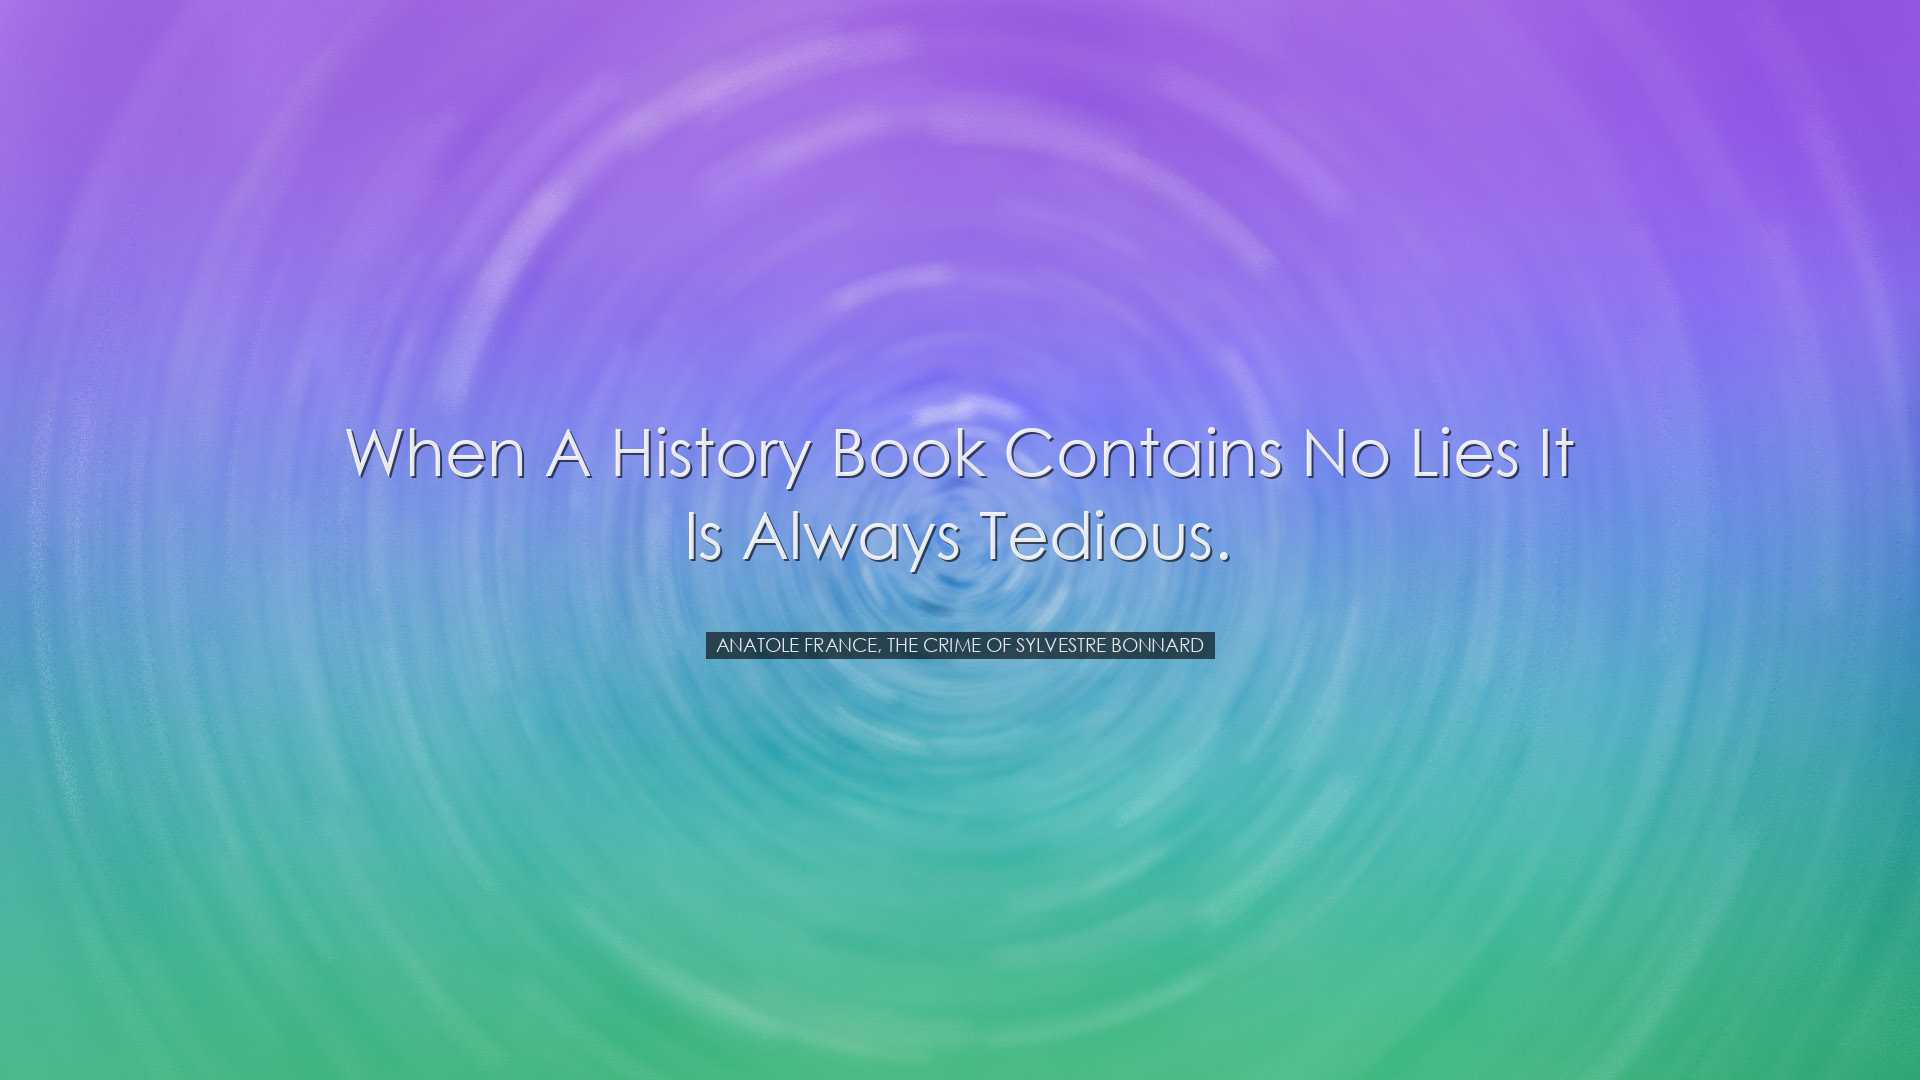 When a history book contains no lies it is always tedious. - Anato